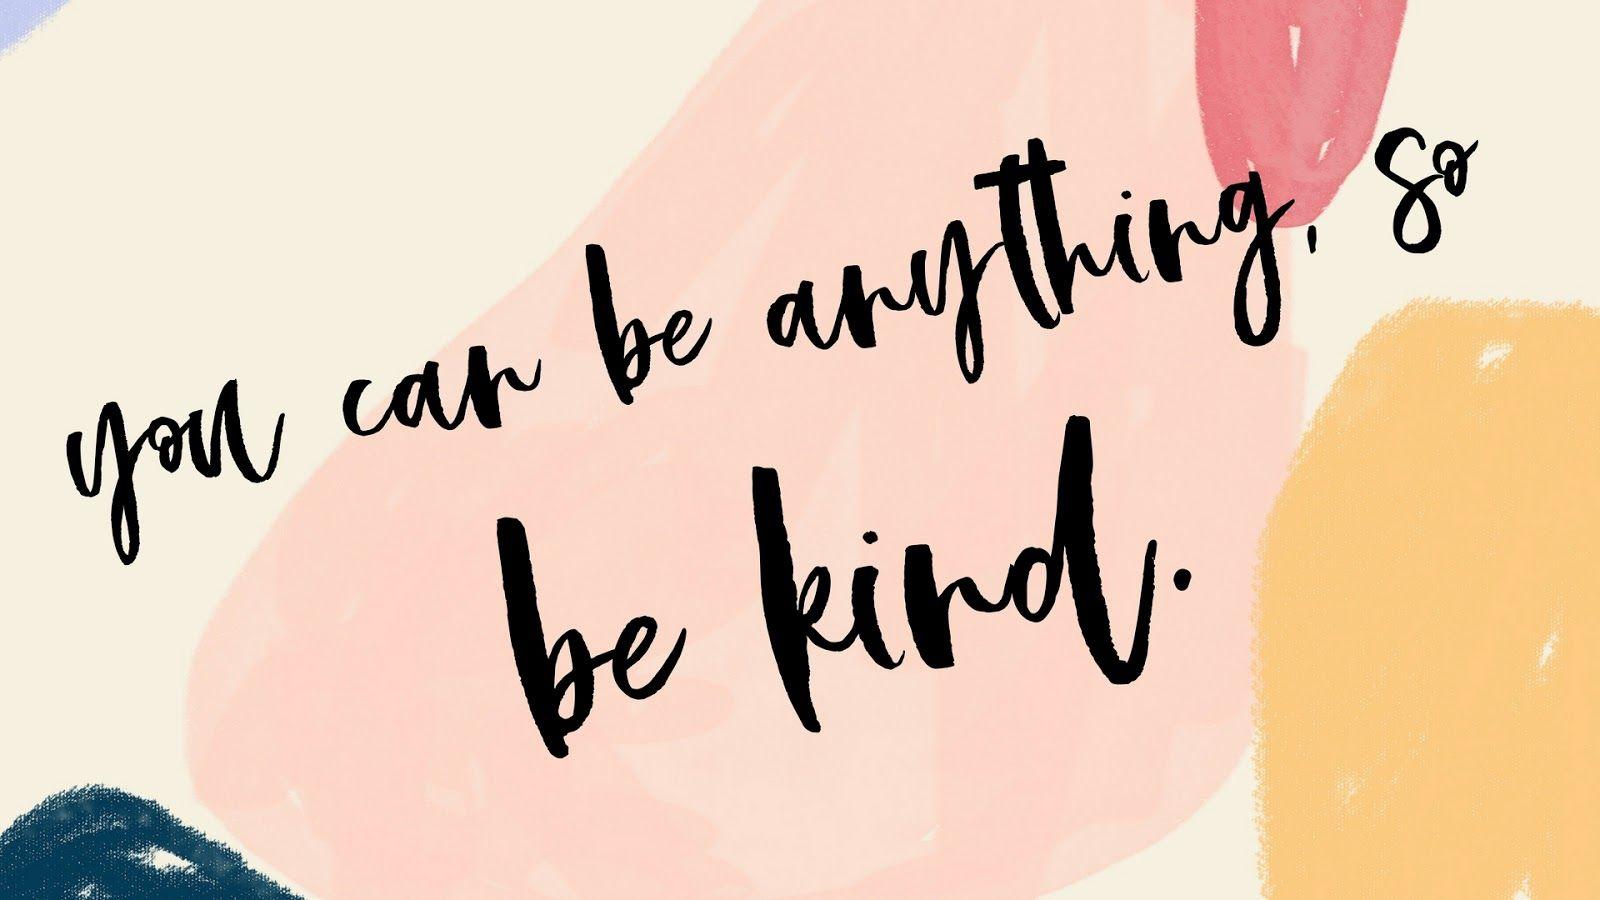 89 Best Quotes About Kindness To Make the World Better